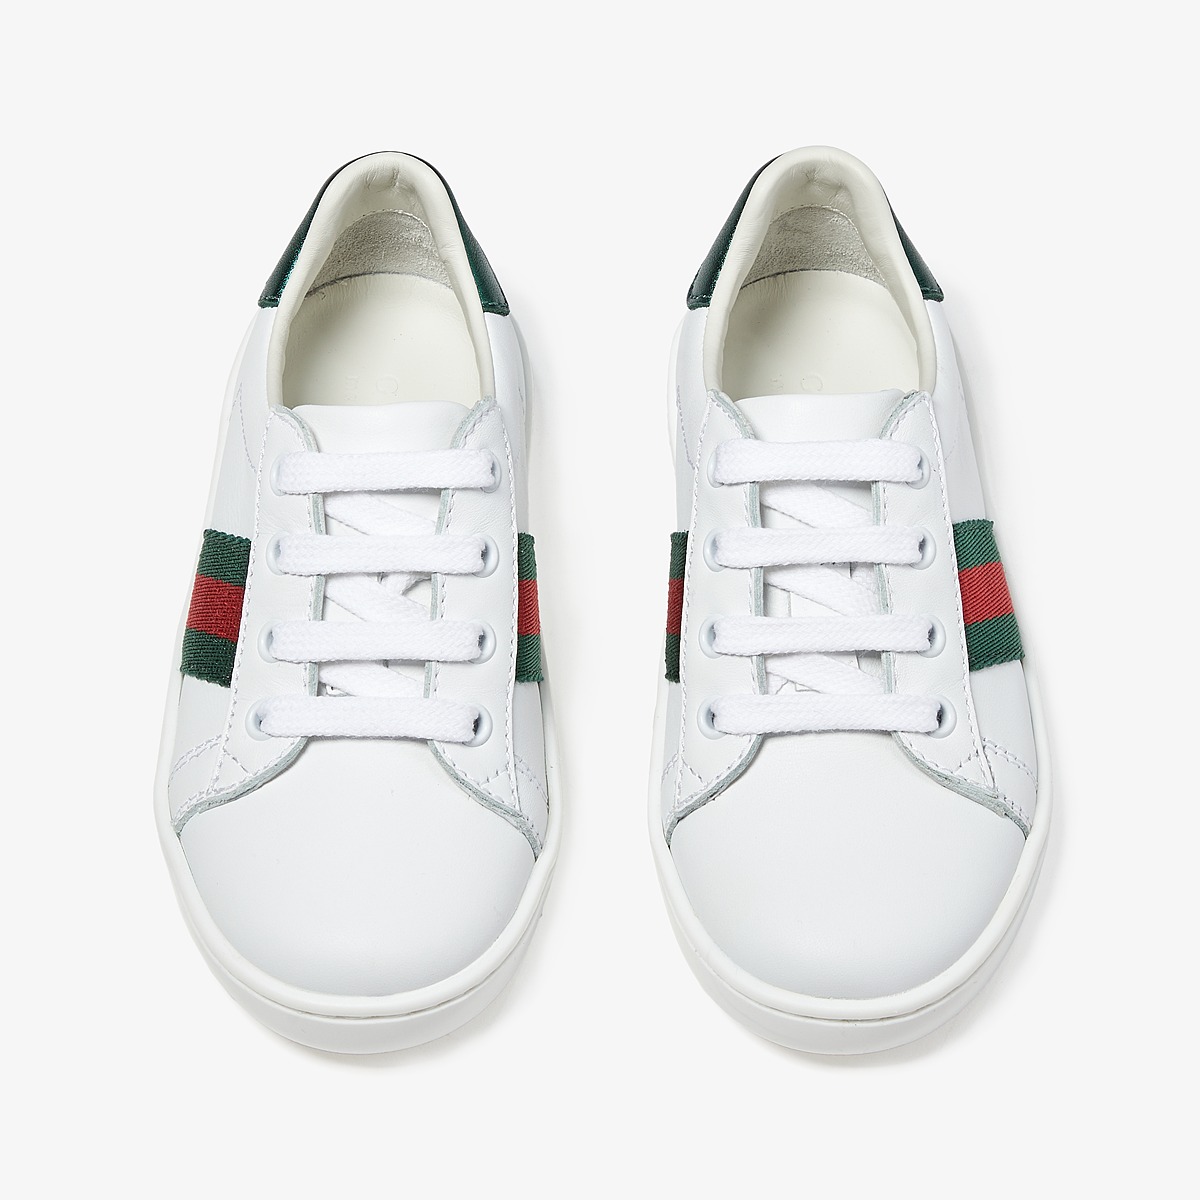 Gucci Kids New Ace Sneakers (Toddler) at Luxury.Zappos.com